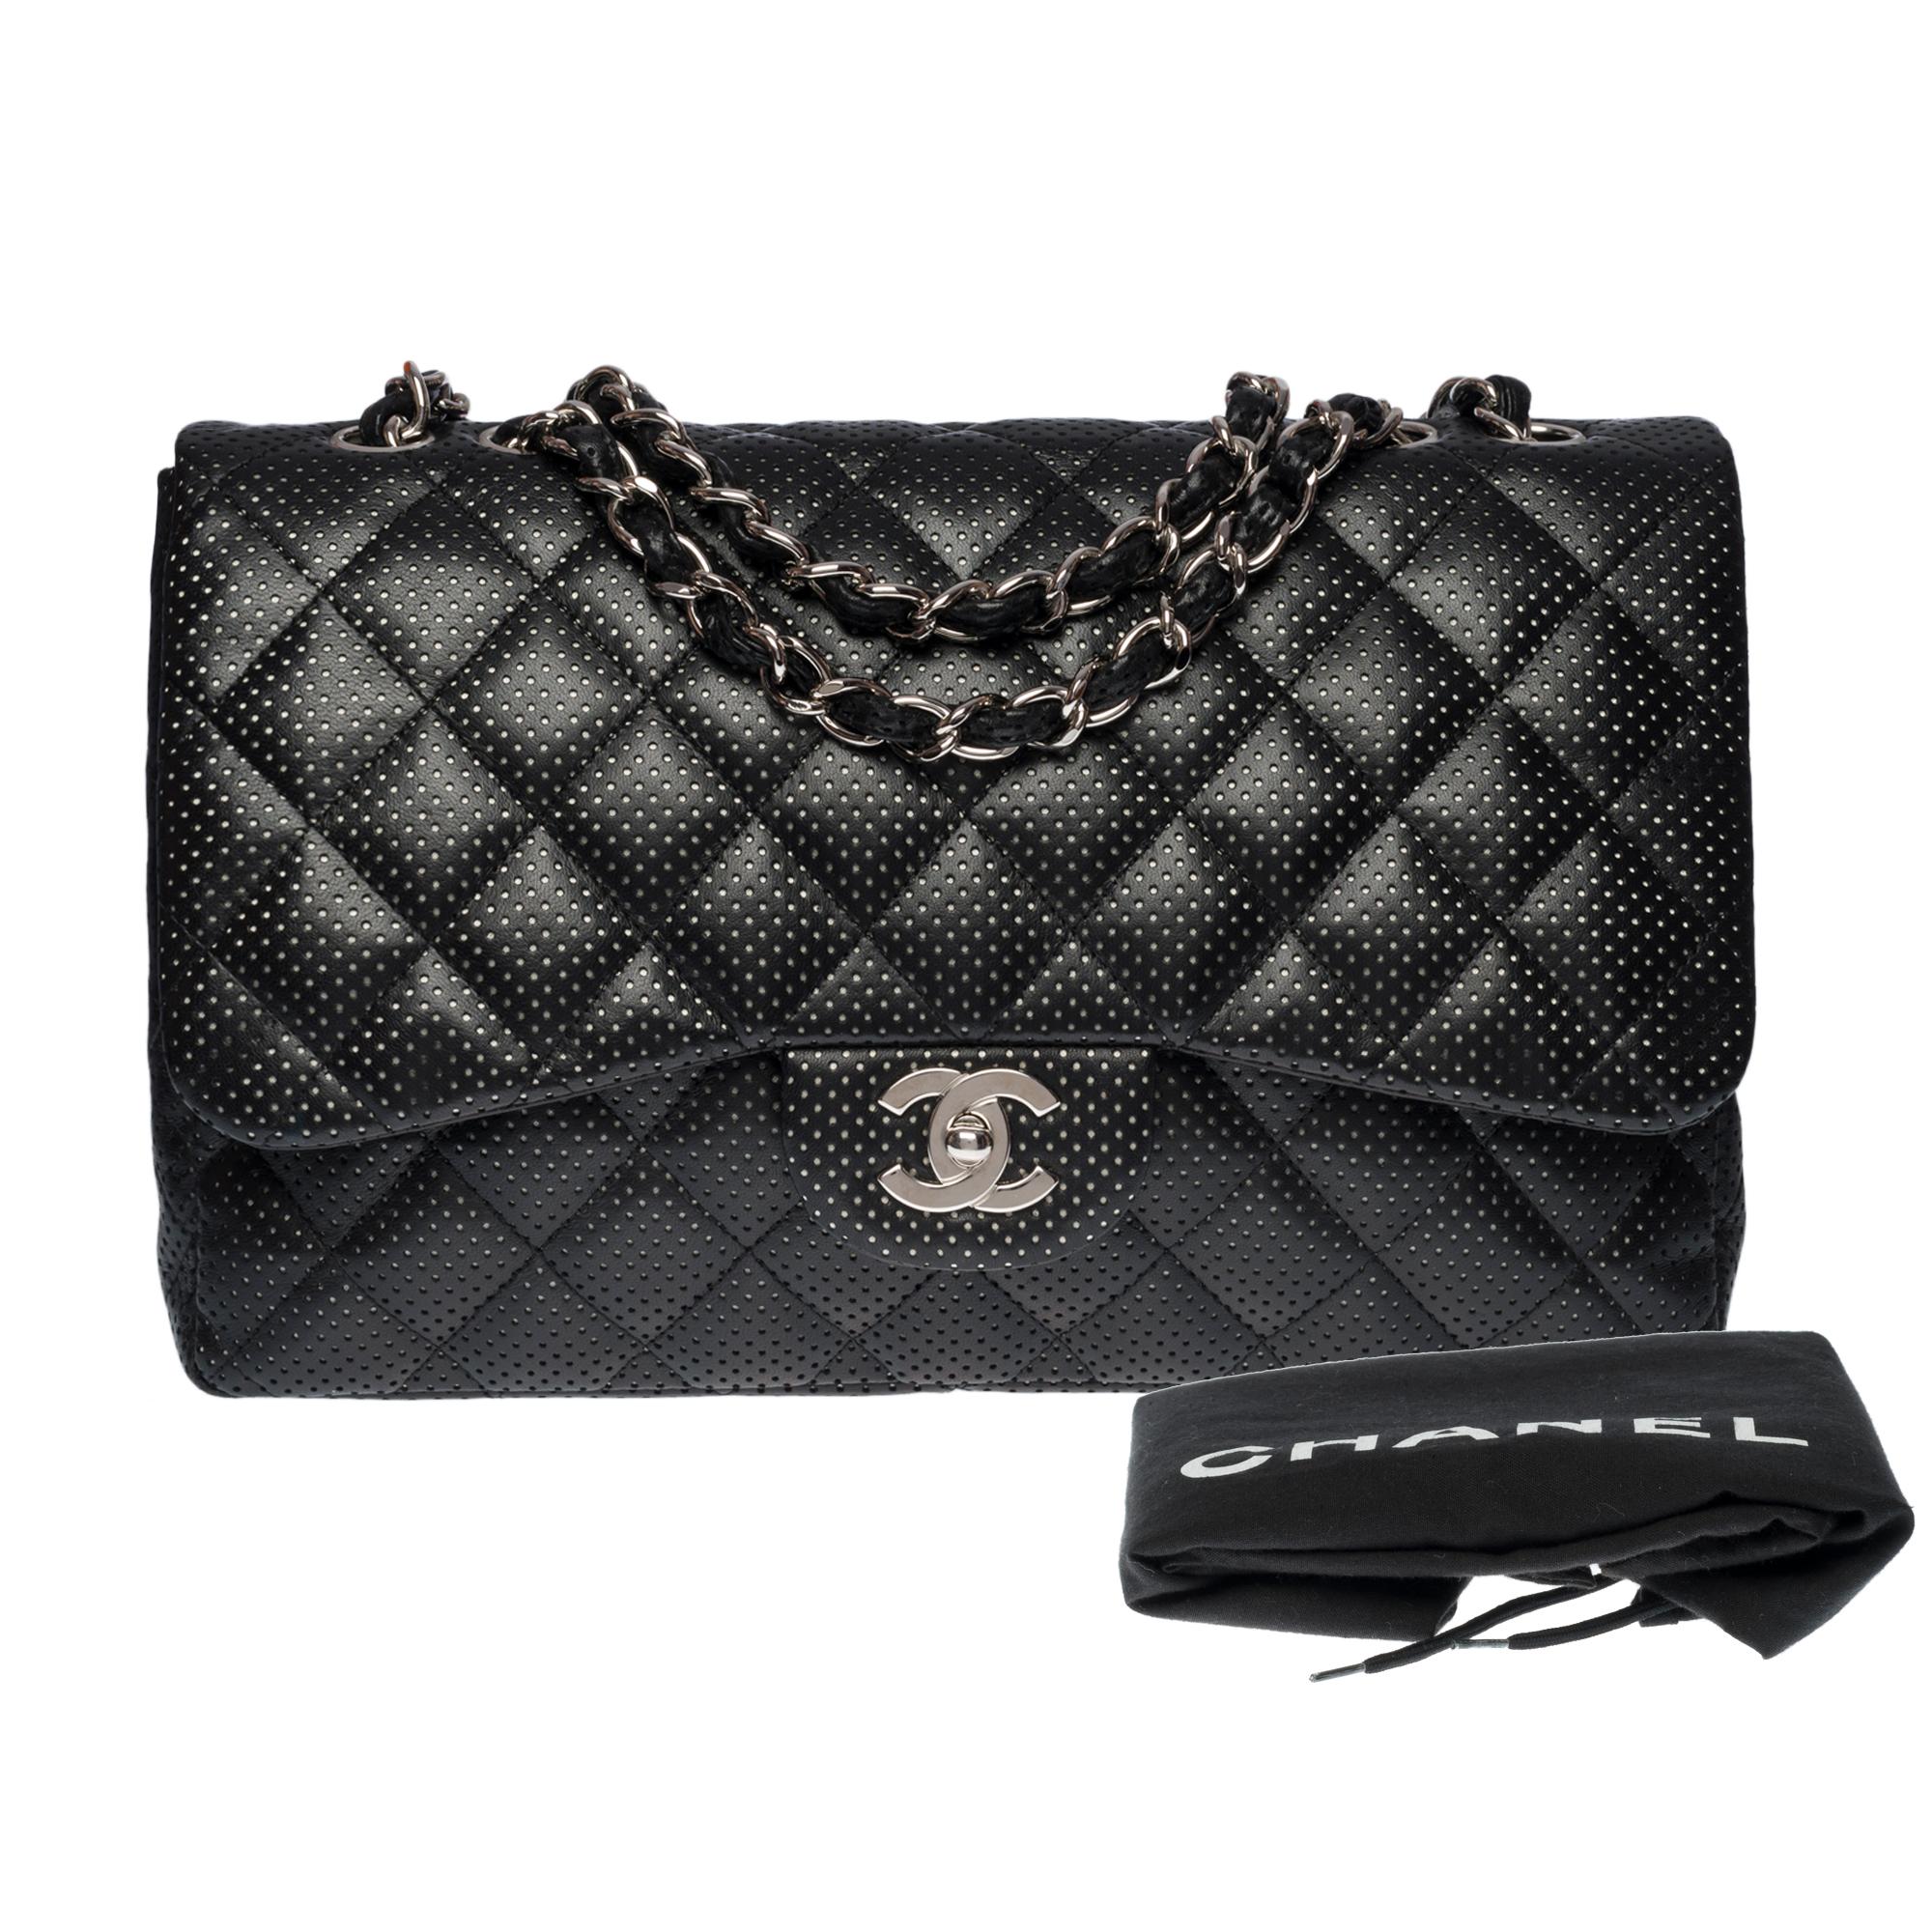 Chanel Timeless Jumbo shoulder Flap bag in black quilted perforated leather, SHW 4